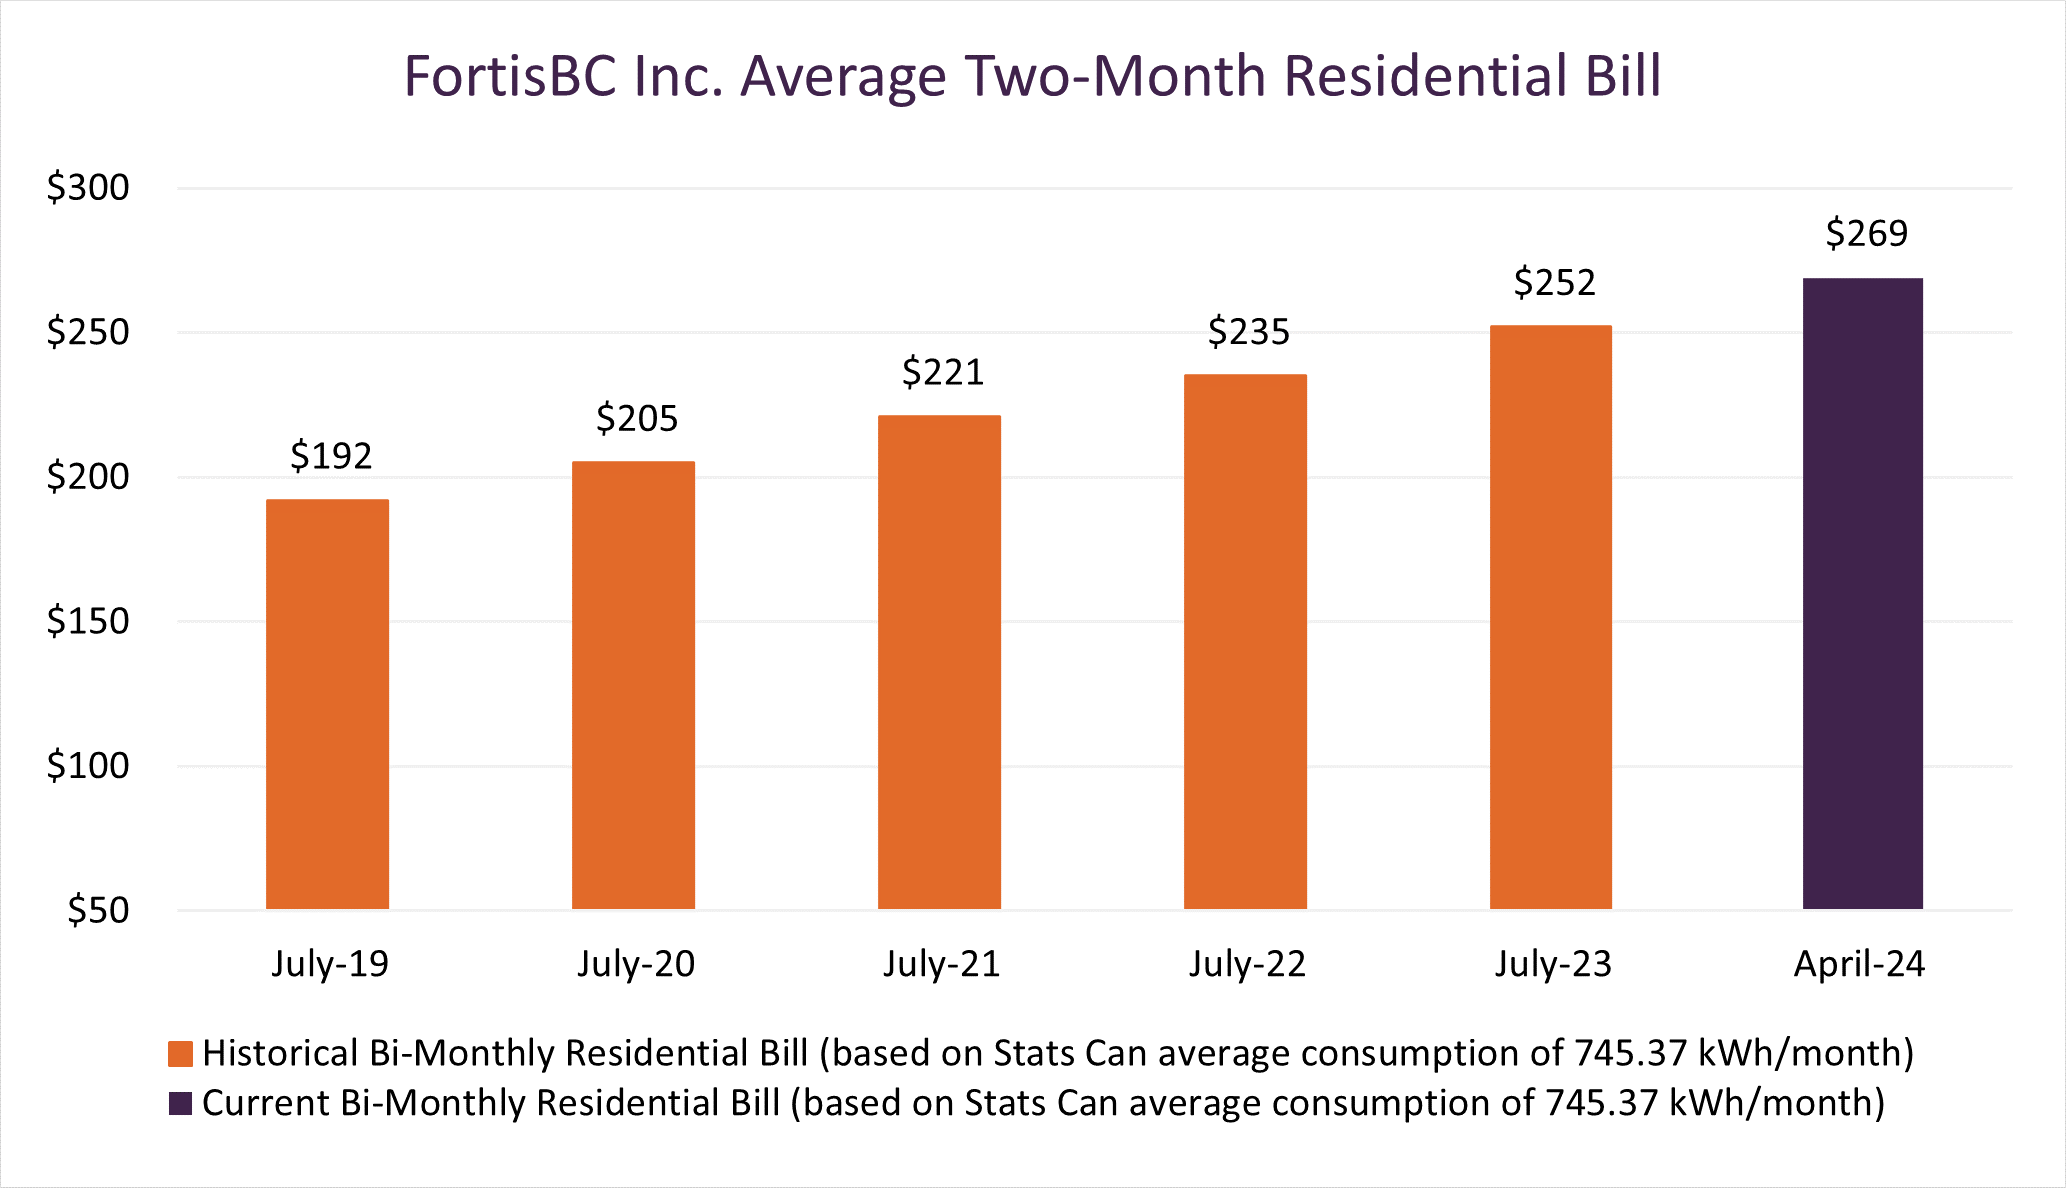 Graph of FortisBC Average Two-month Residential Bill